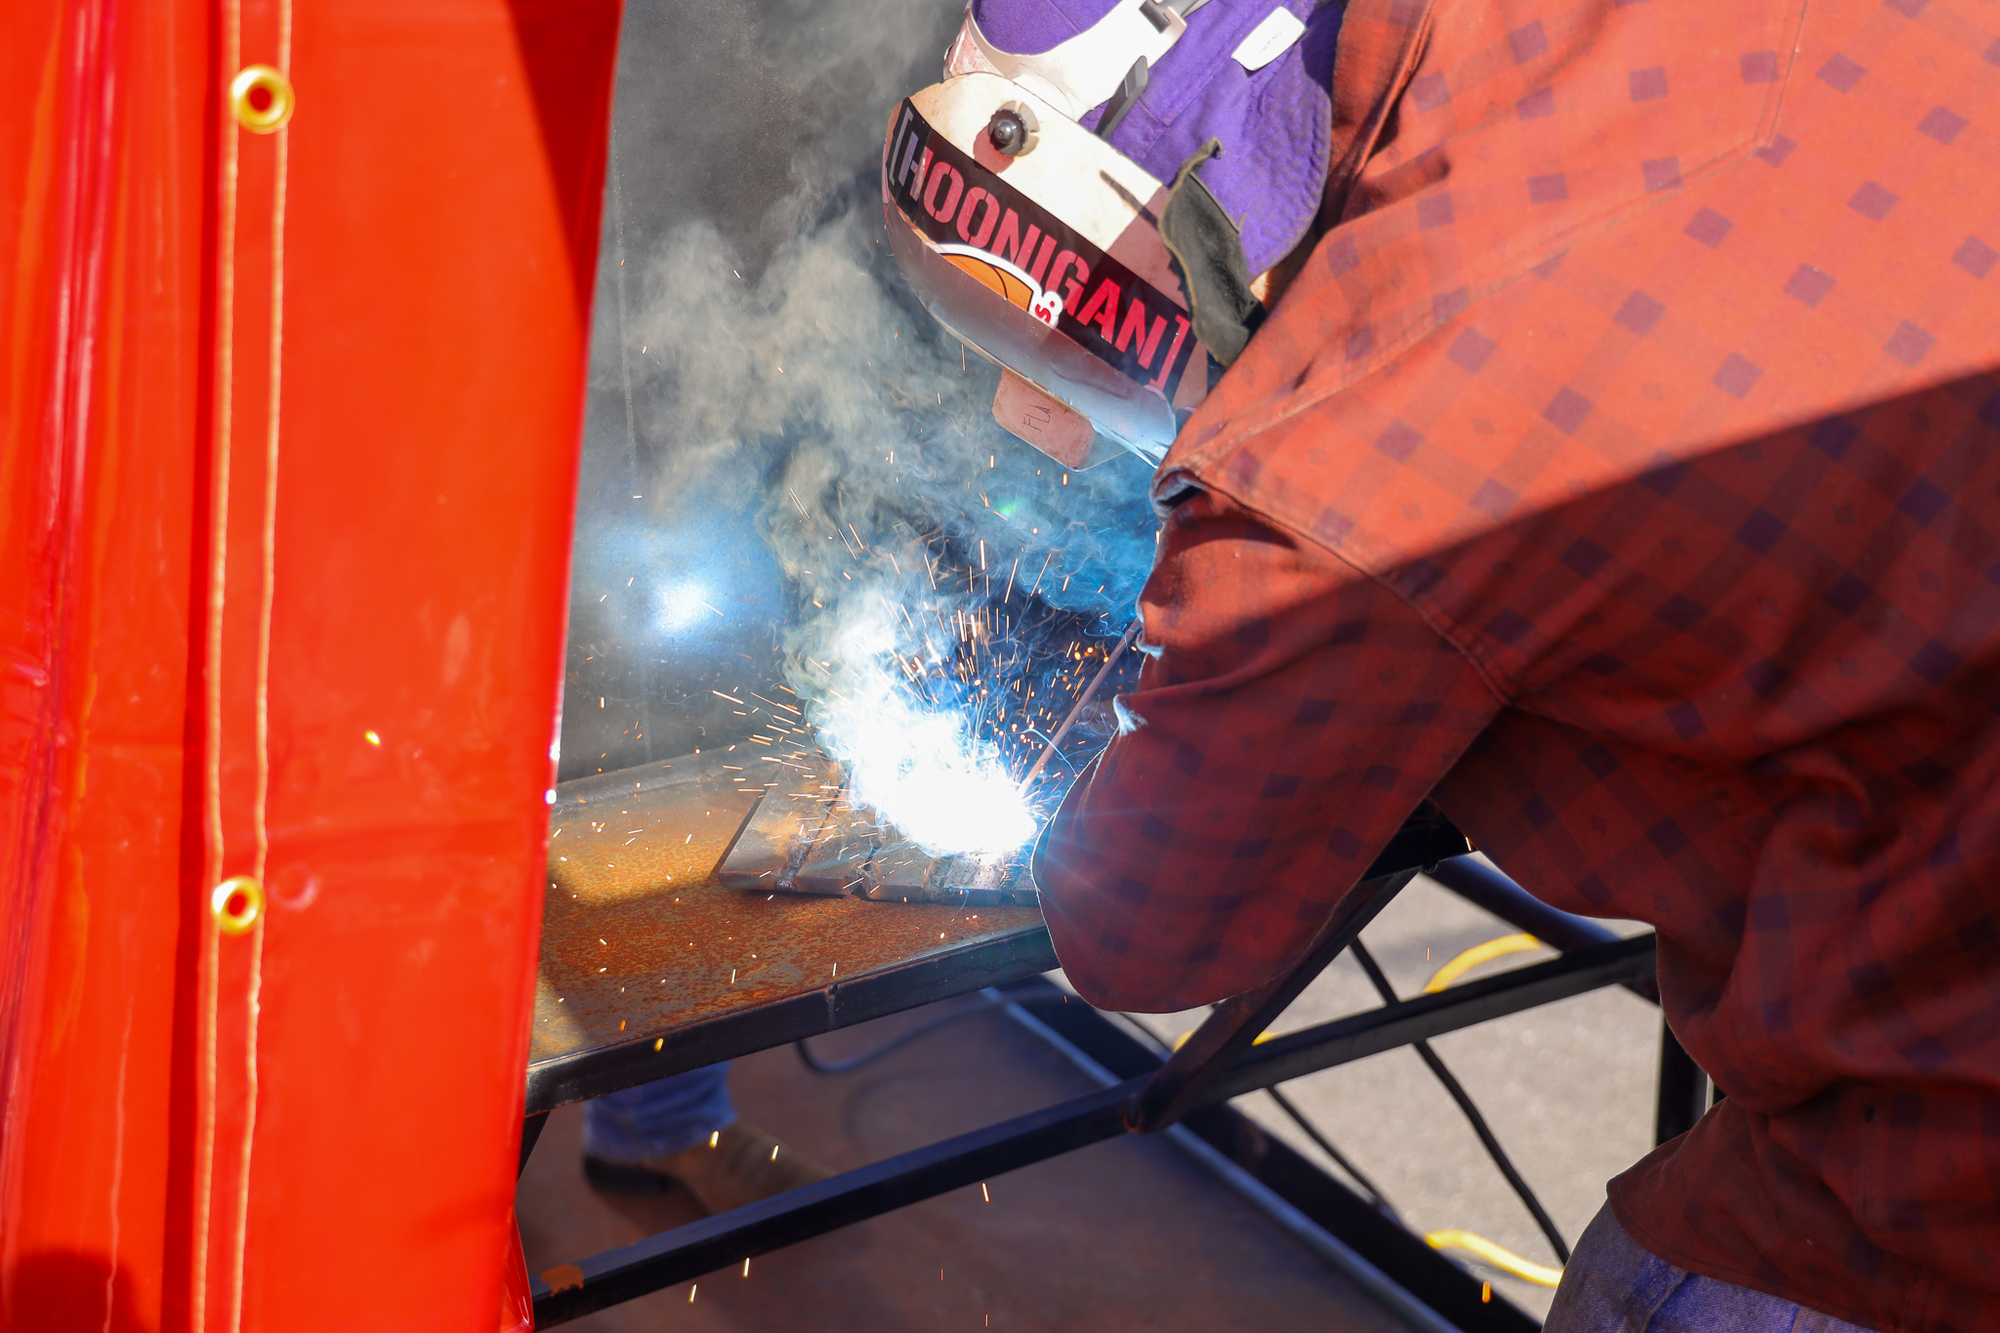 Welding demonstration at the 2022 Leon Works Expo.